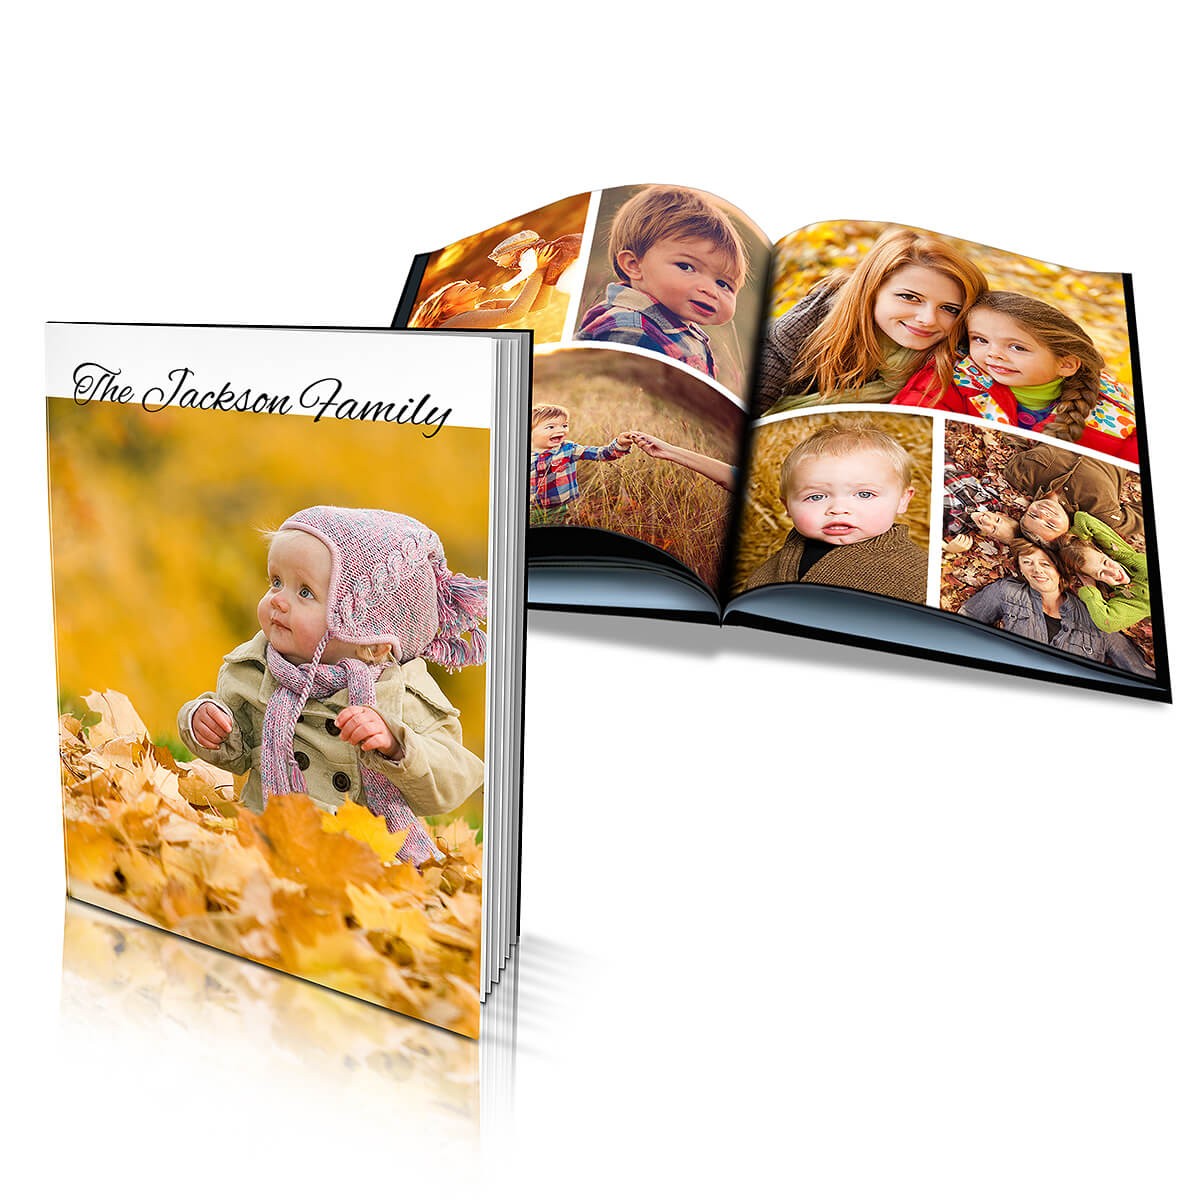 A4 (20x28cm) Soft Cover Book 20 pages